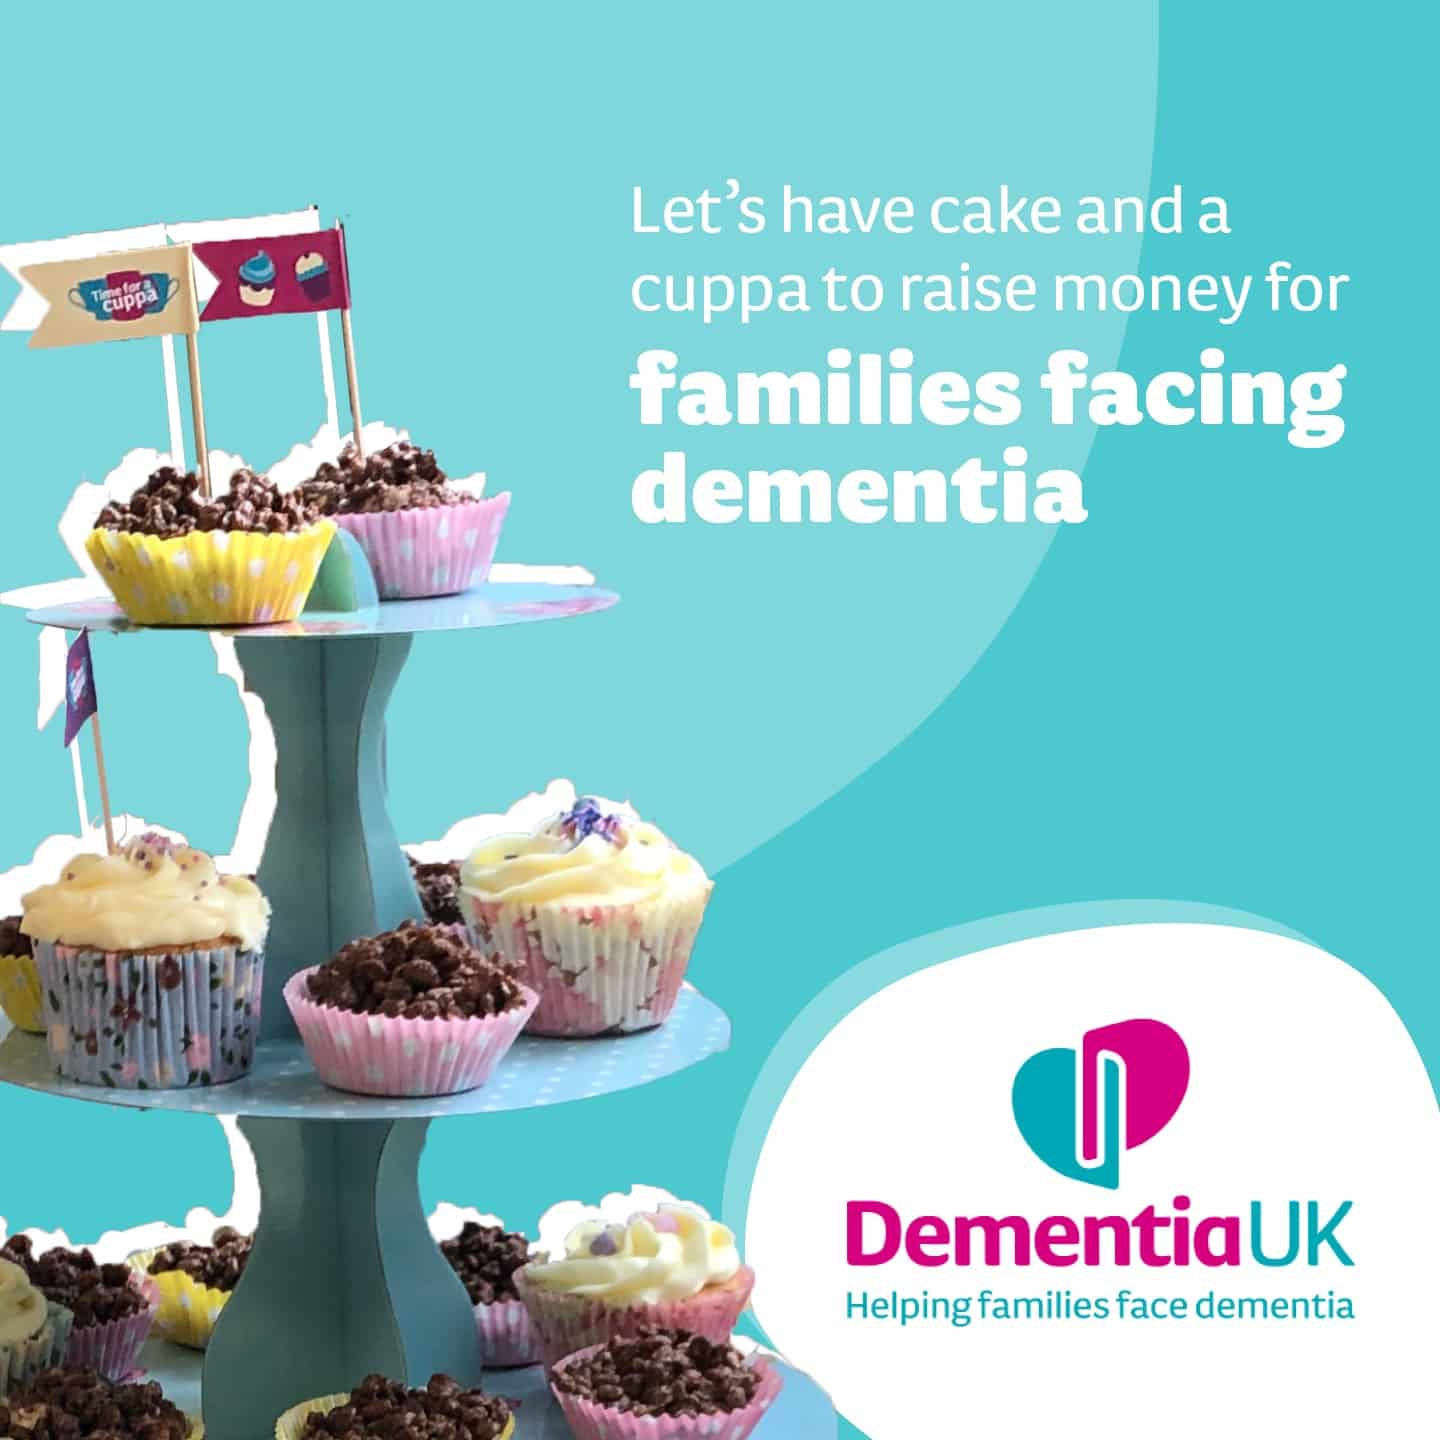 https://stratus.campaign-image.eu/images/32883000015890342_zc_v1_1714485122783_dementia_uk_time_for_a_cuppa.jpg